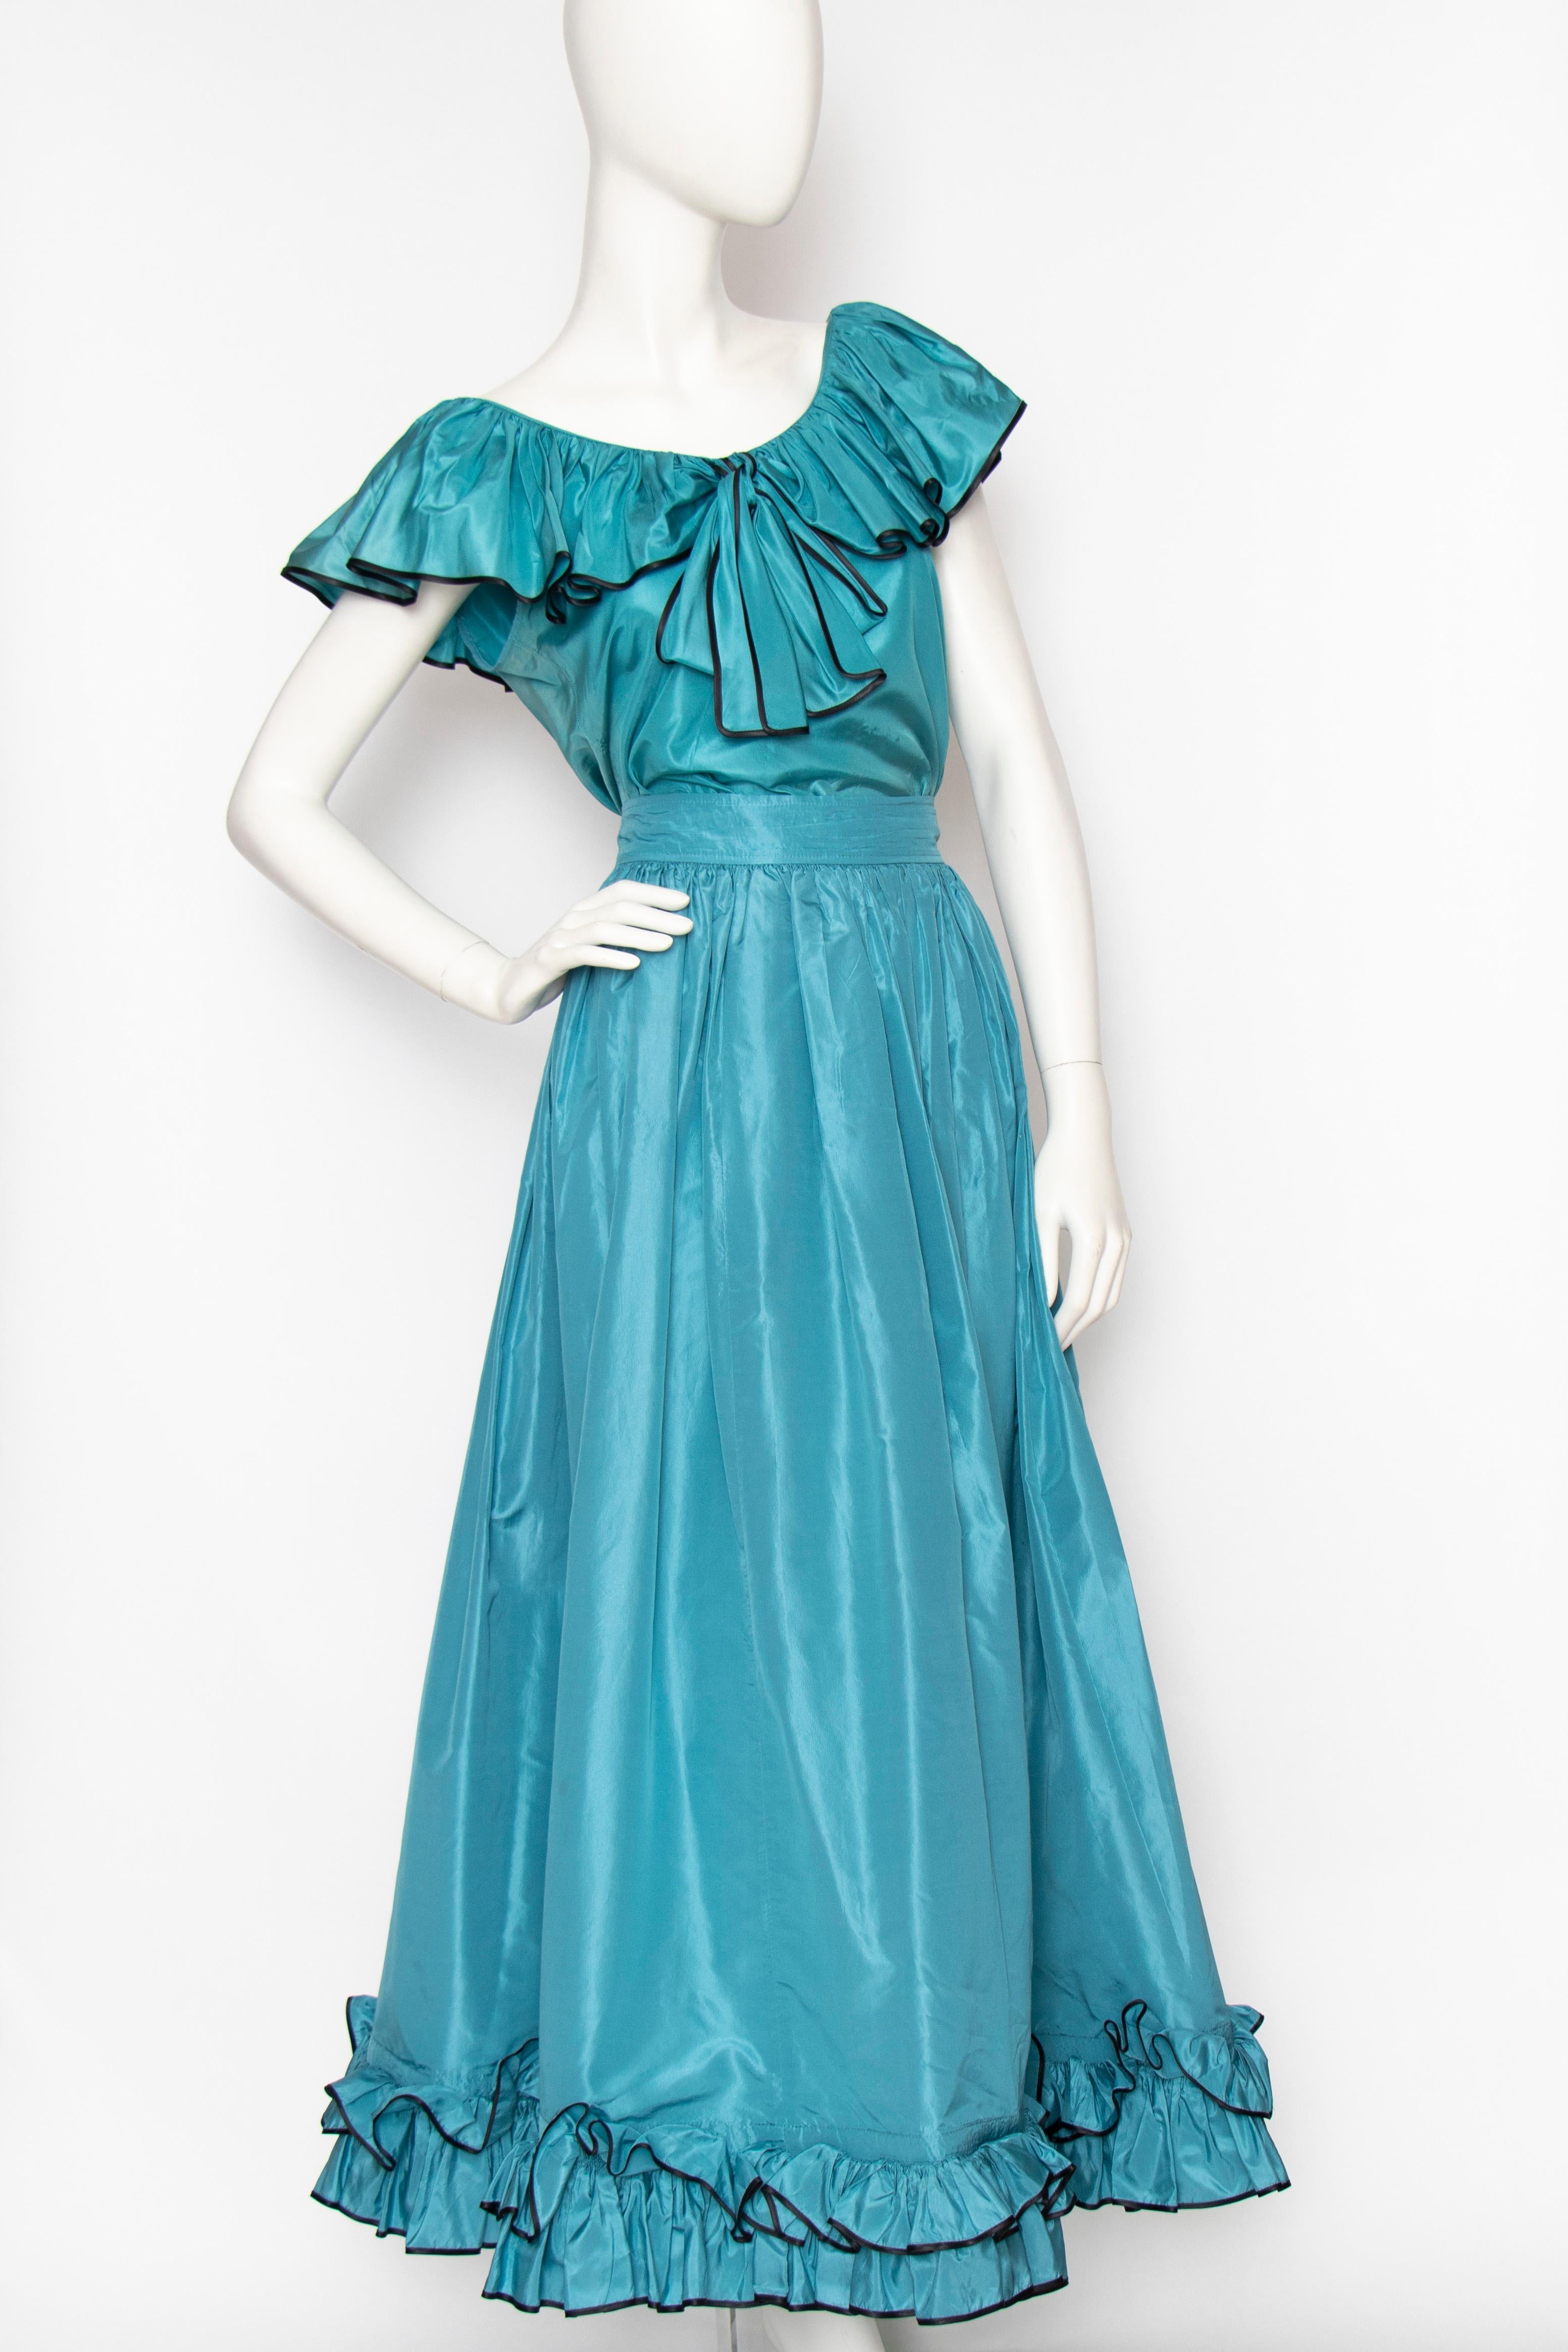 An incredible 1980s Yves Saint Laurent luscious turquoise silk taffeta two-piece dress consisting of a wide a-line skirt and sleeveless top. Both items have a ruffle detail, the skirt at the hem and the blouse at the collar complete with bow detail.